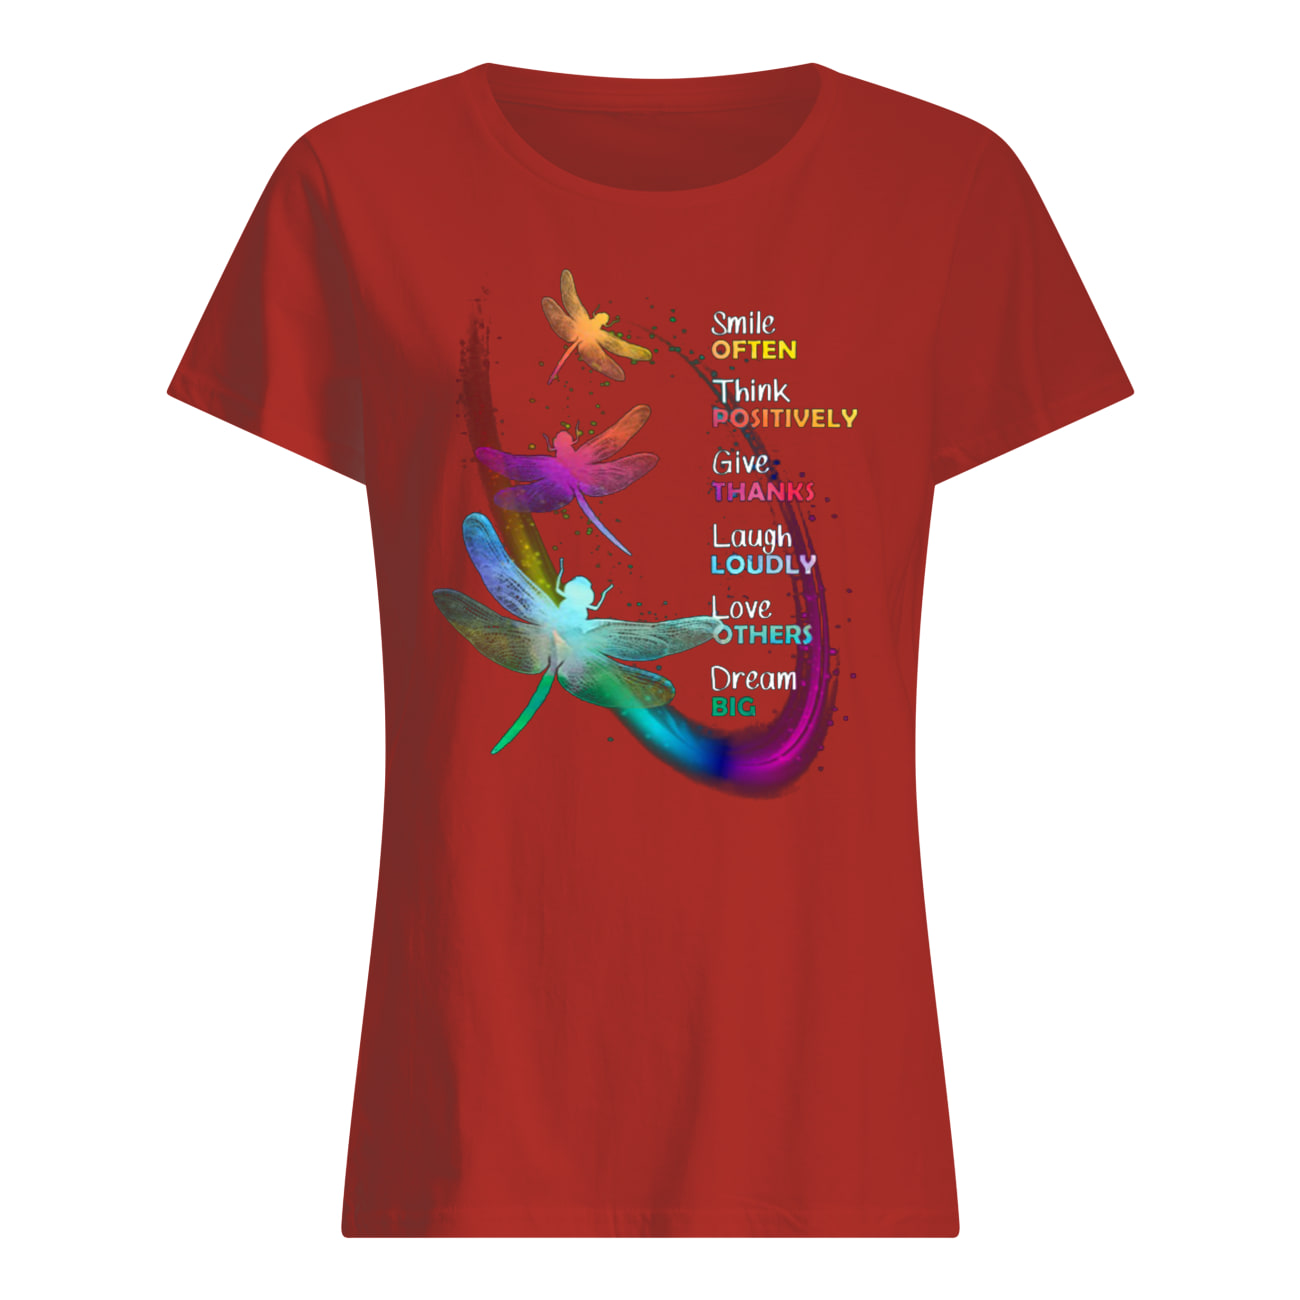 Dragonfly smile often think positively give thanks laugh loudly love others dream big womens shirt